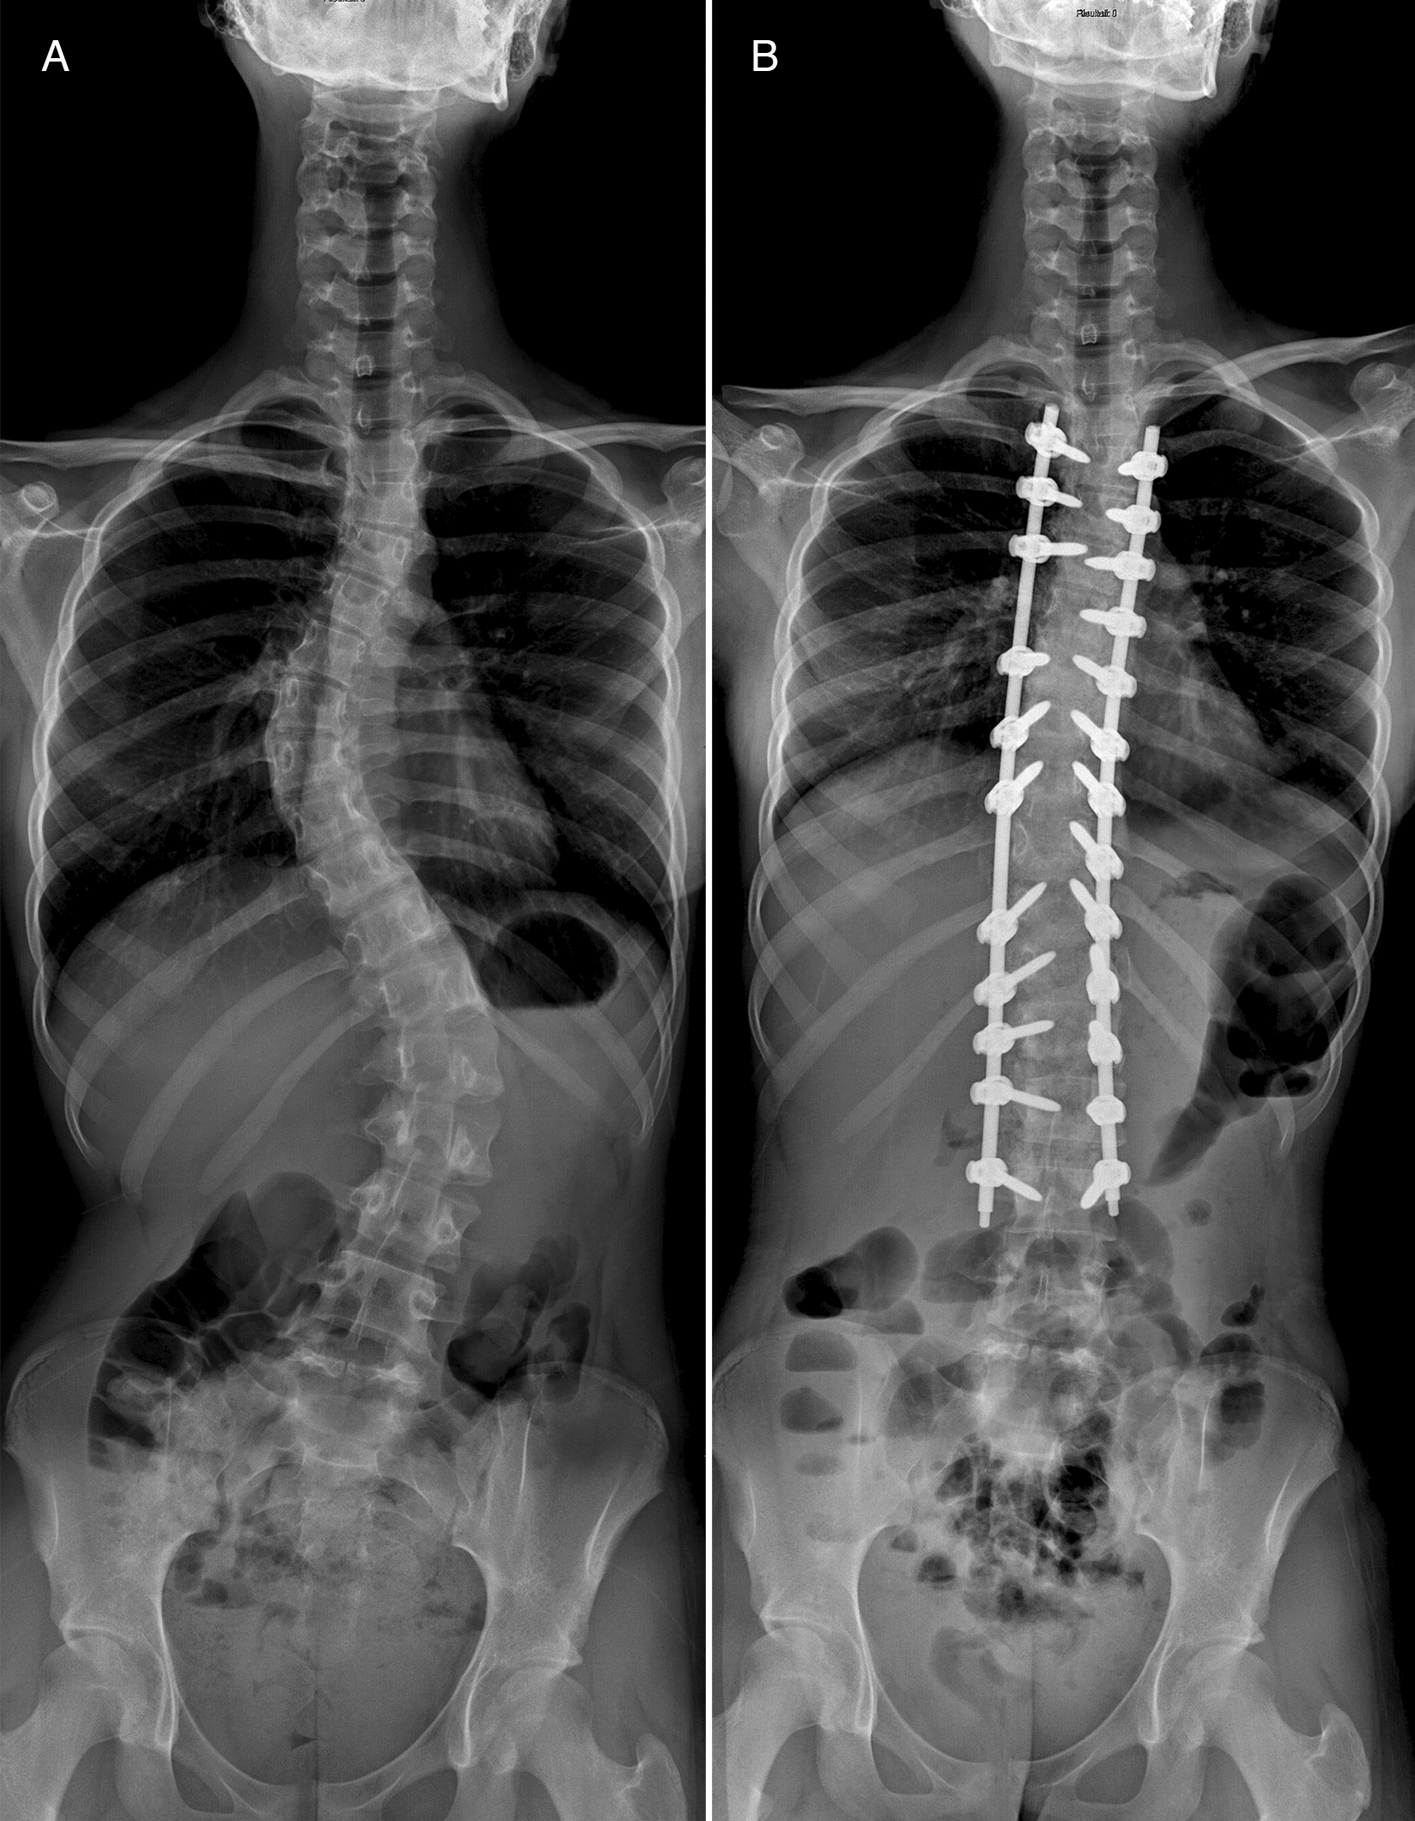 Minimally invasive surgery versus standard posterior approach in the treatment of adolescent idiopathic scoliosis: a 2-year follow-up retrospective study